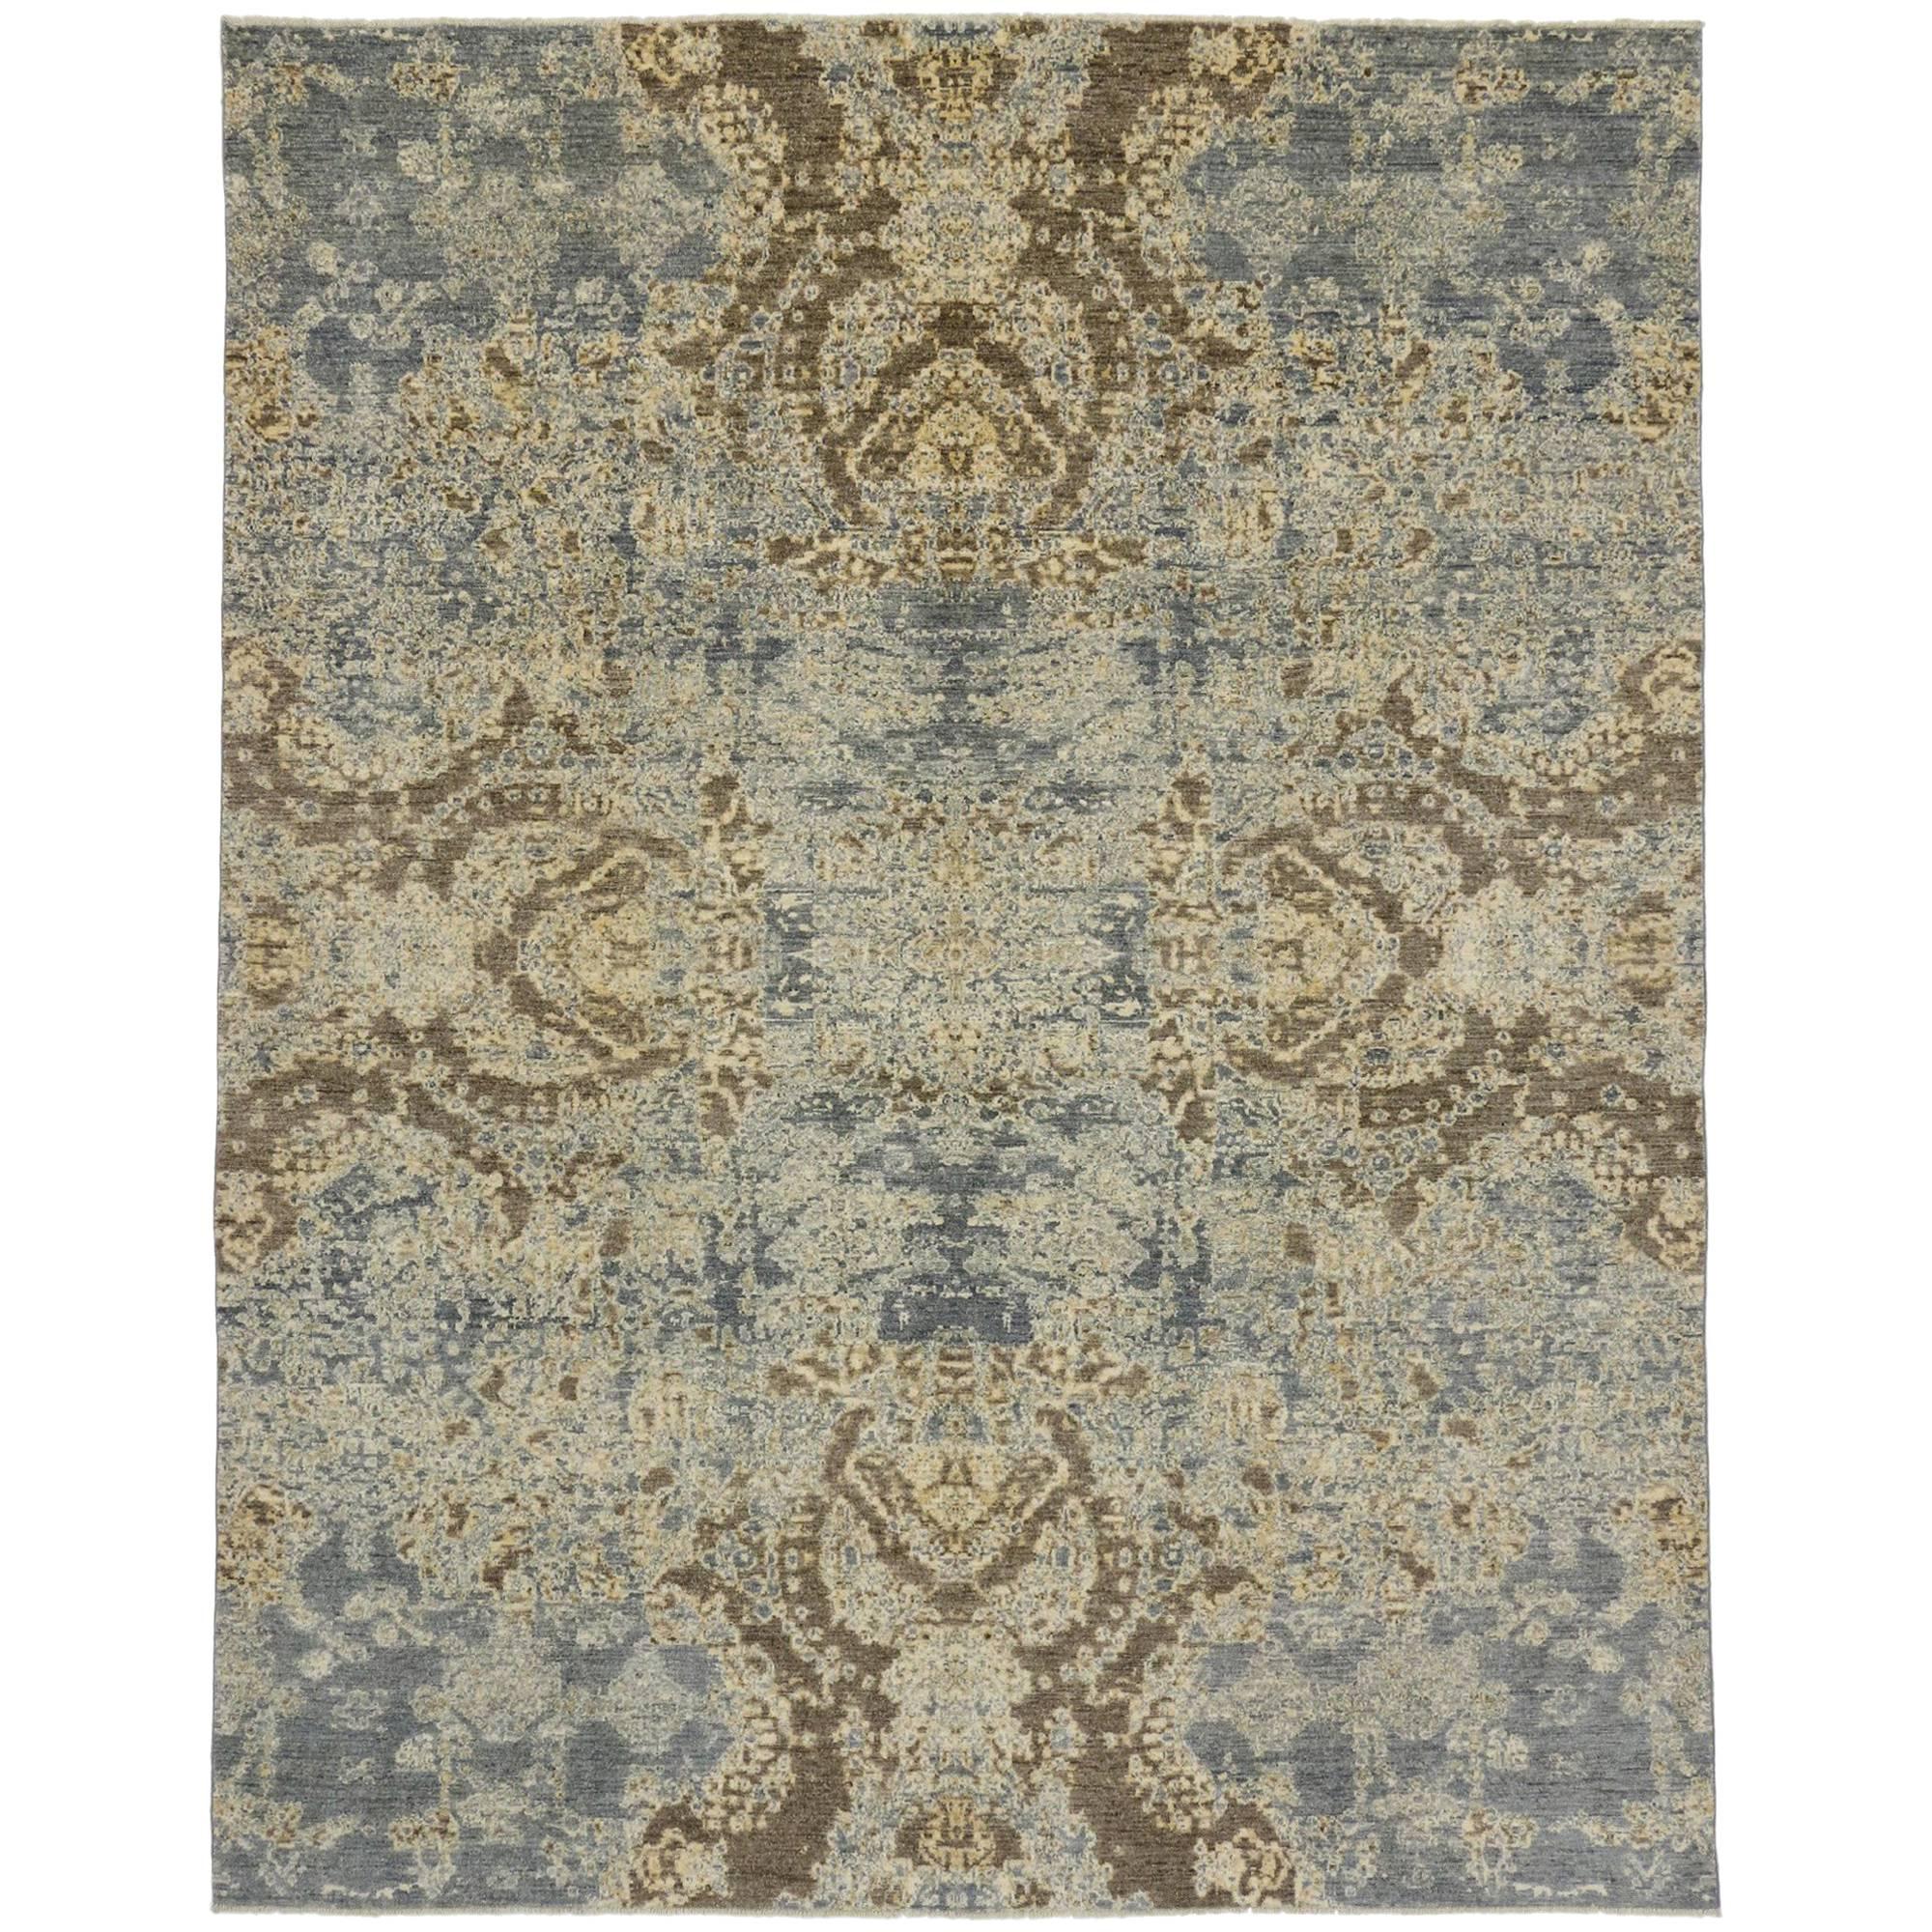 New Transitional Area Rug with Contemporary Abstract Style and Coastal Colors 